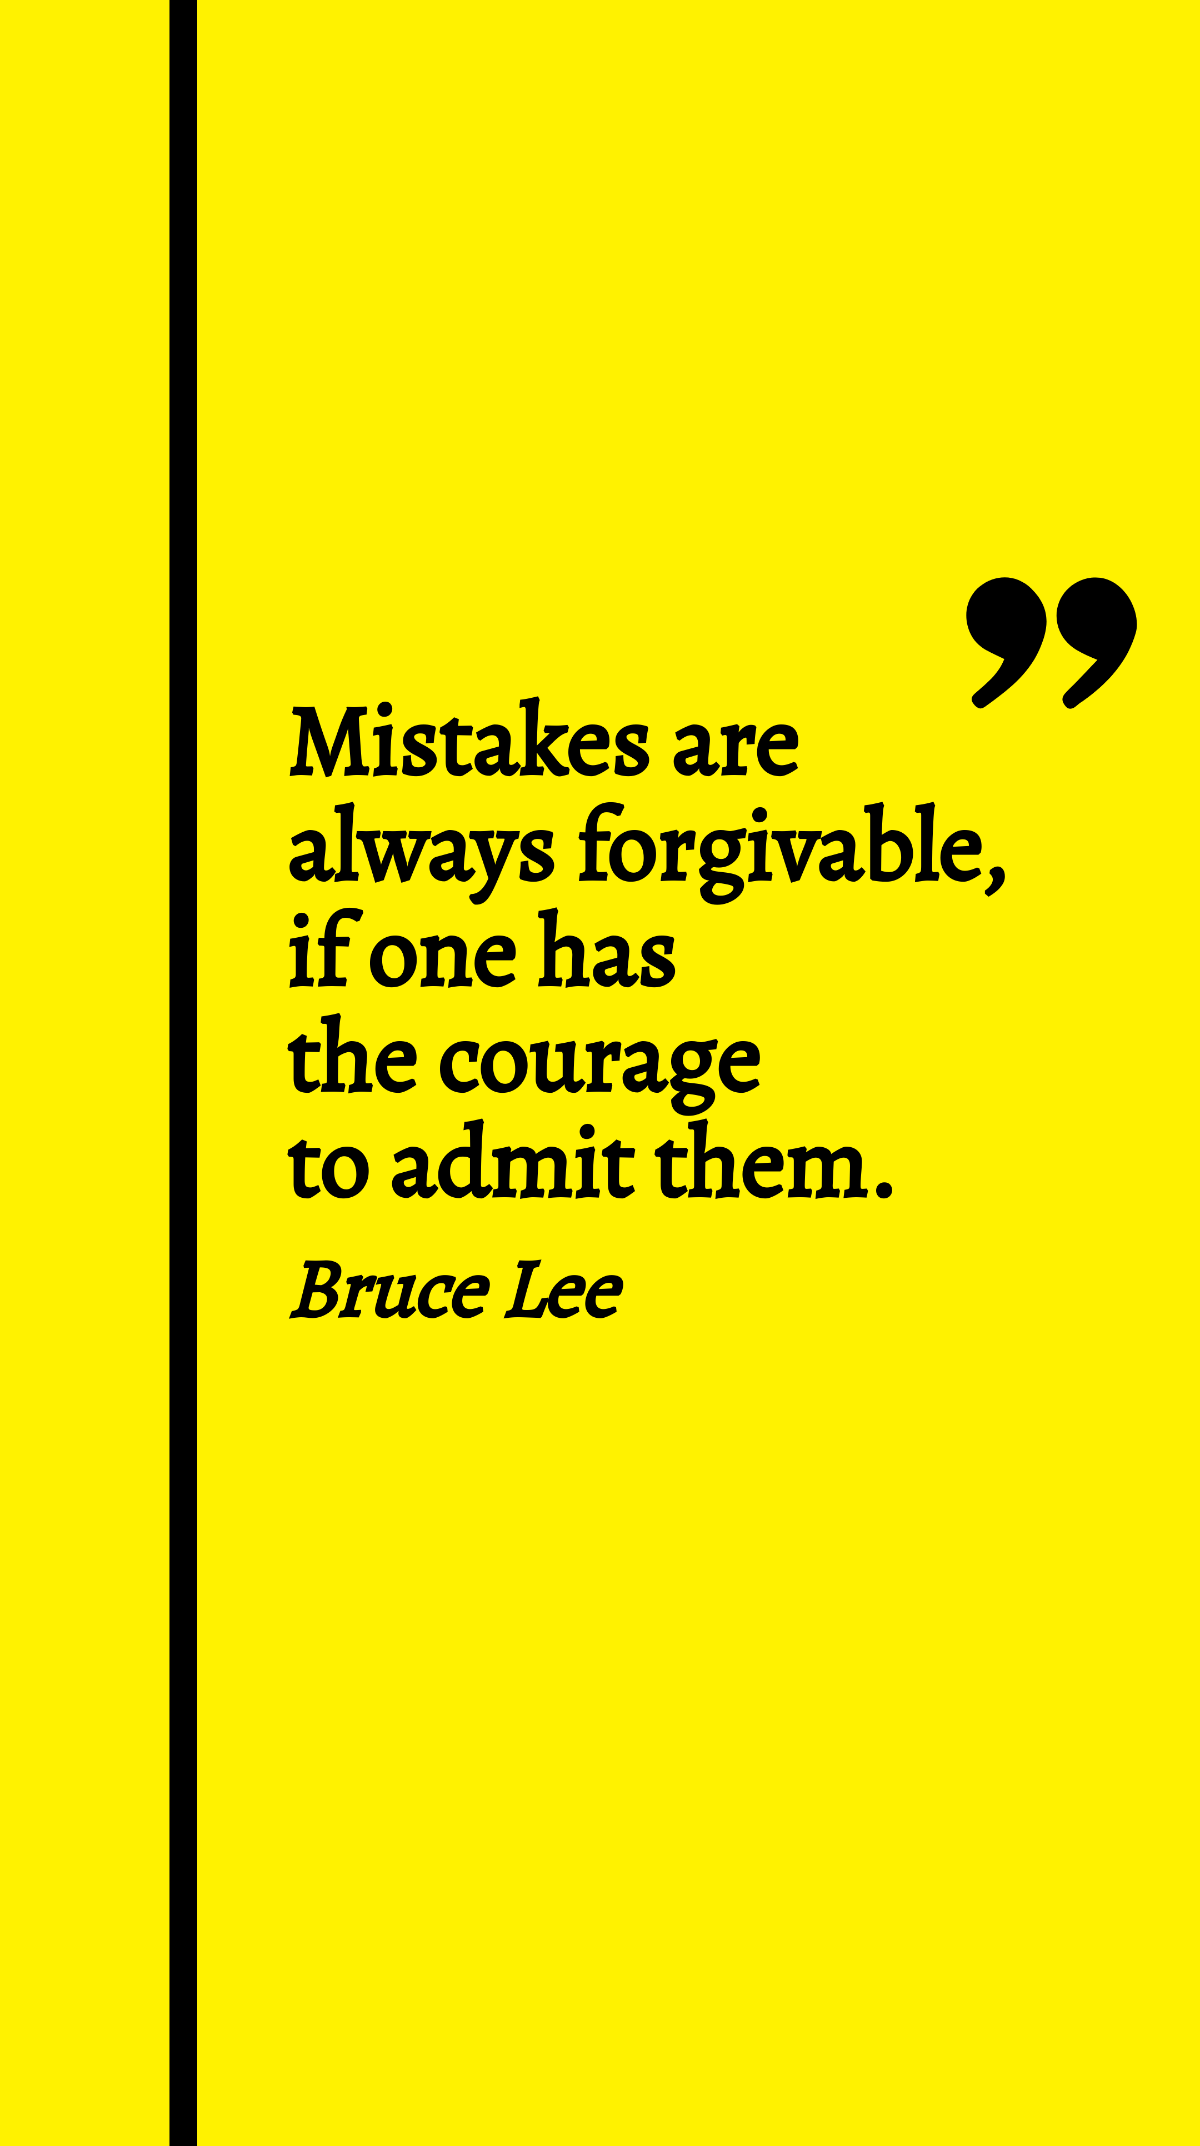 Bruce Lee - Mistakes are always forgivable, if one has the courage to admit them. Template